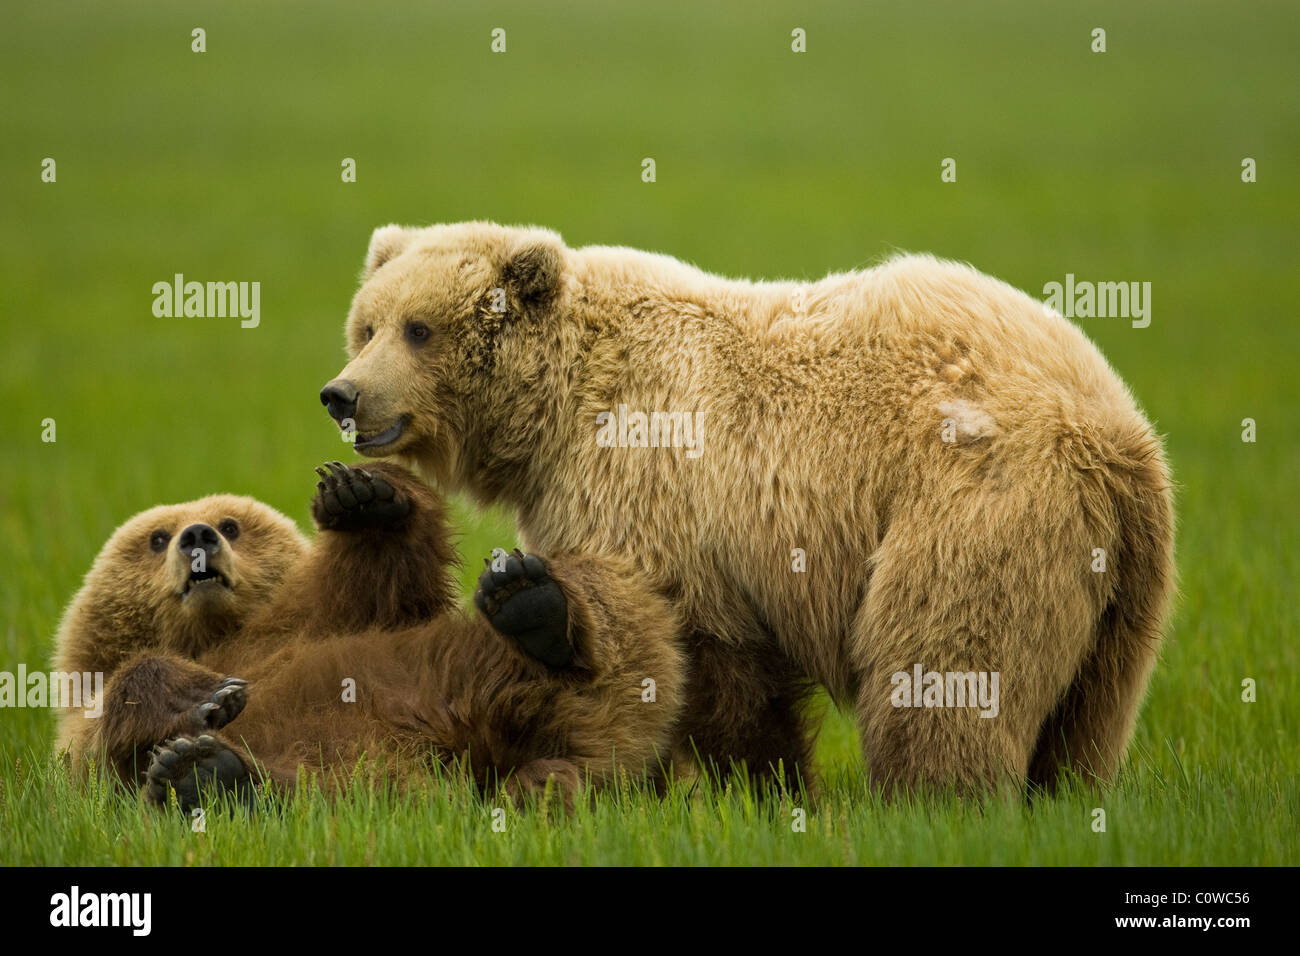 Two adolescent female brown bears wrestle playfully. June 25th, 2008, Lake Clark National Park, Alaska, USA. Photo by Gus Curtis Stock Photo